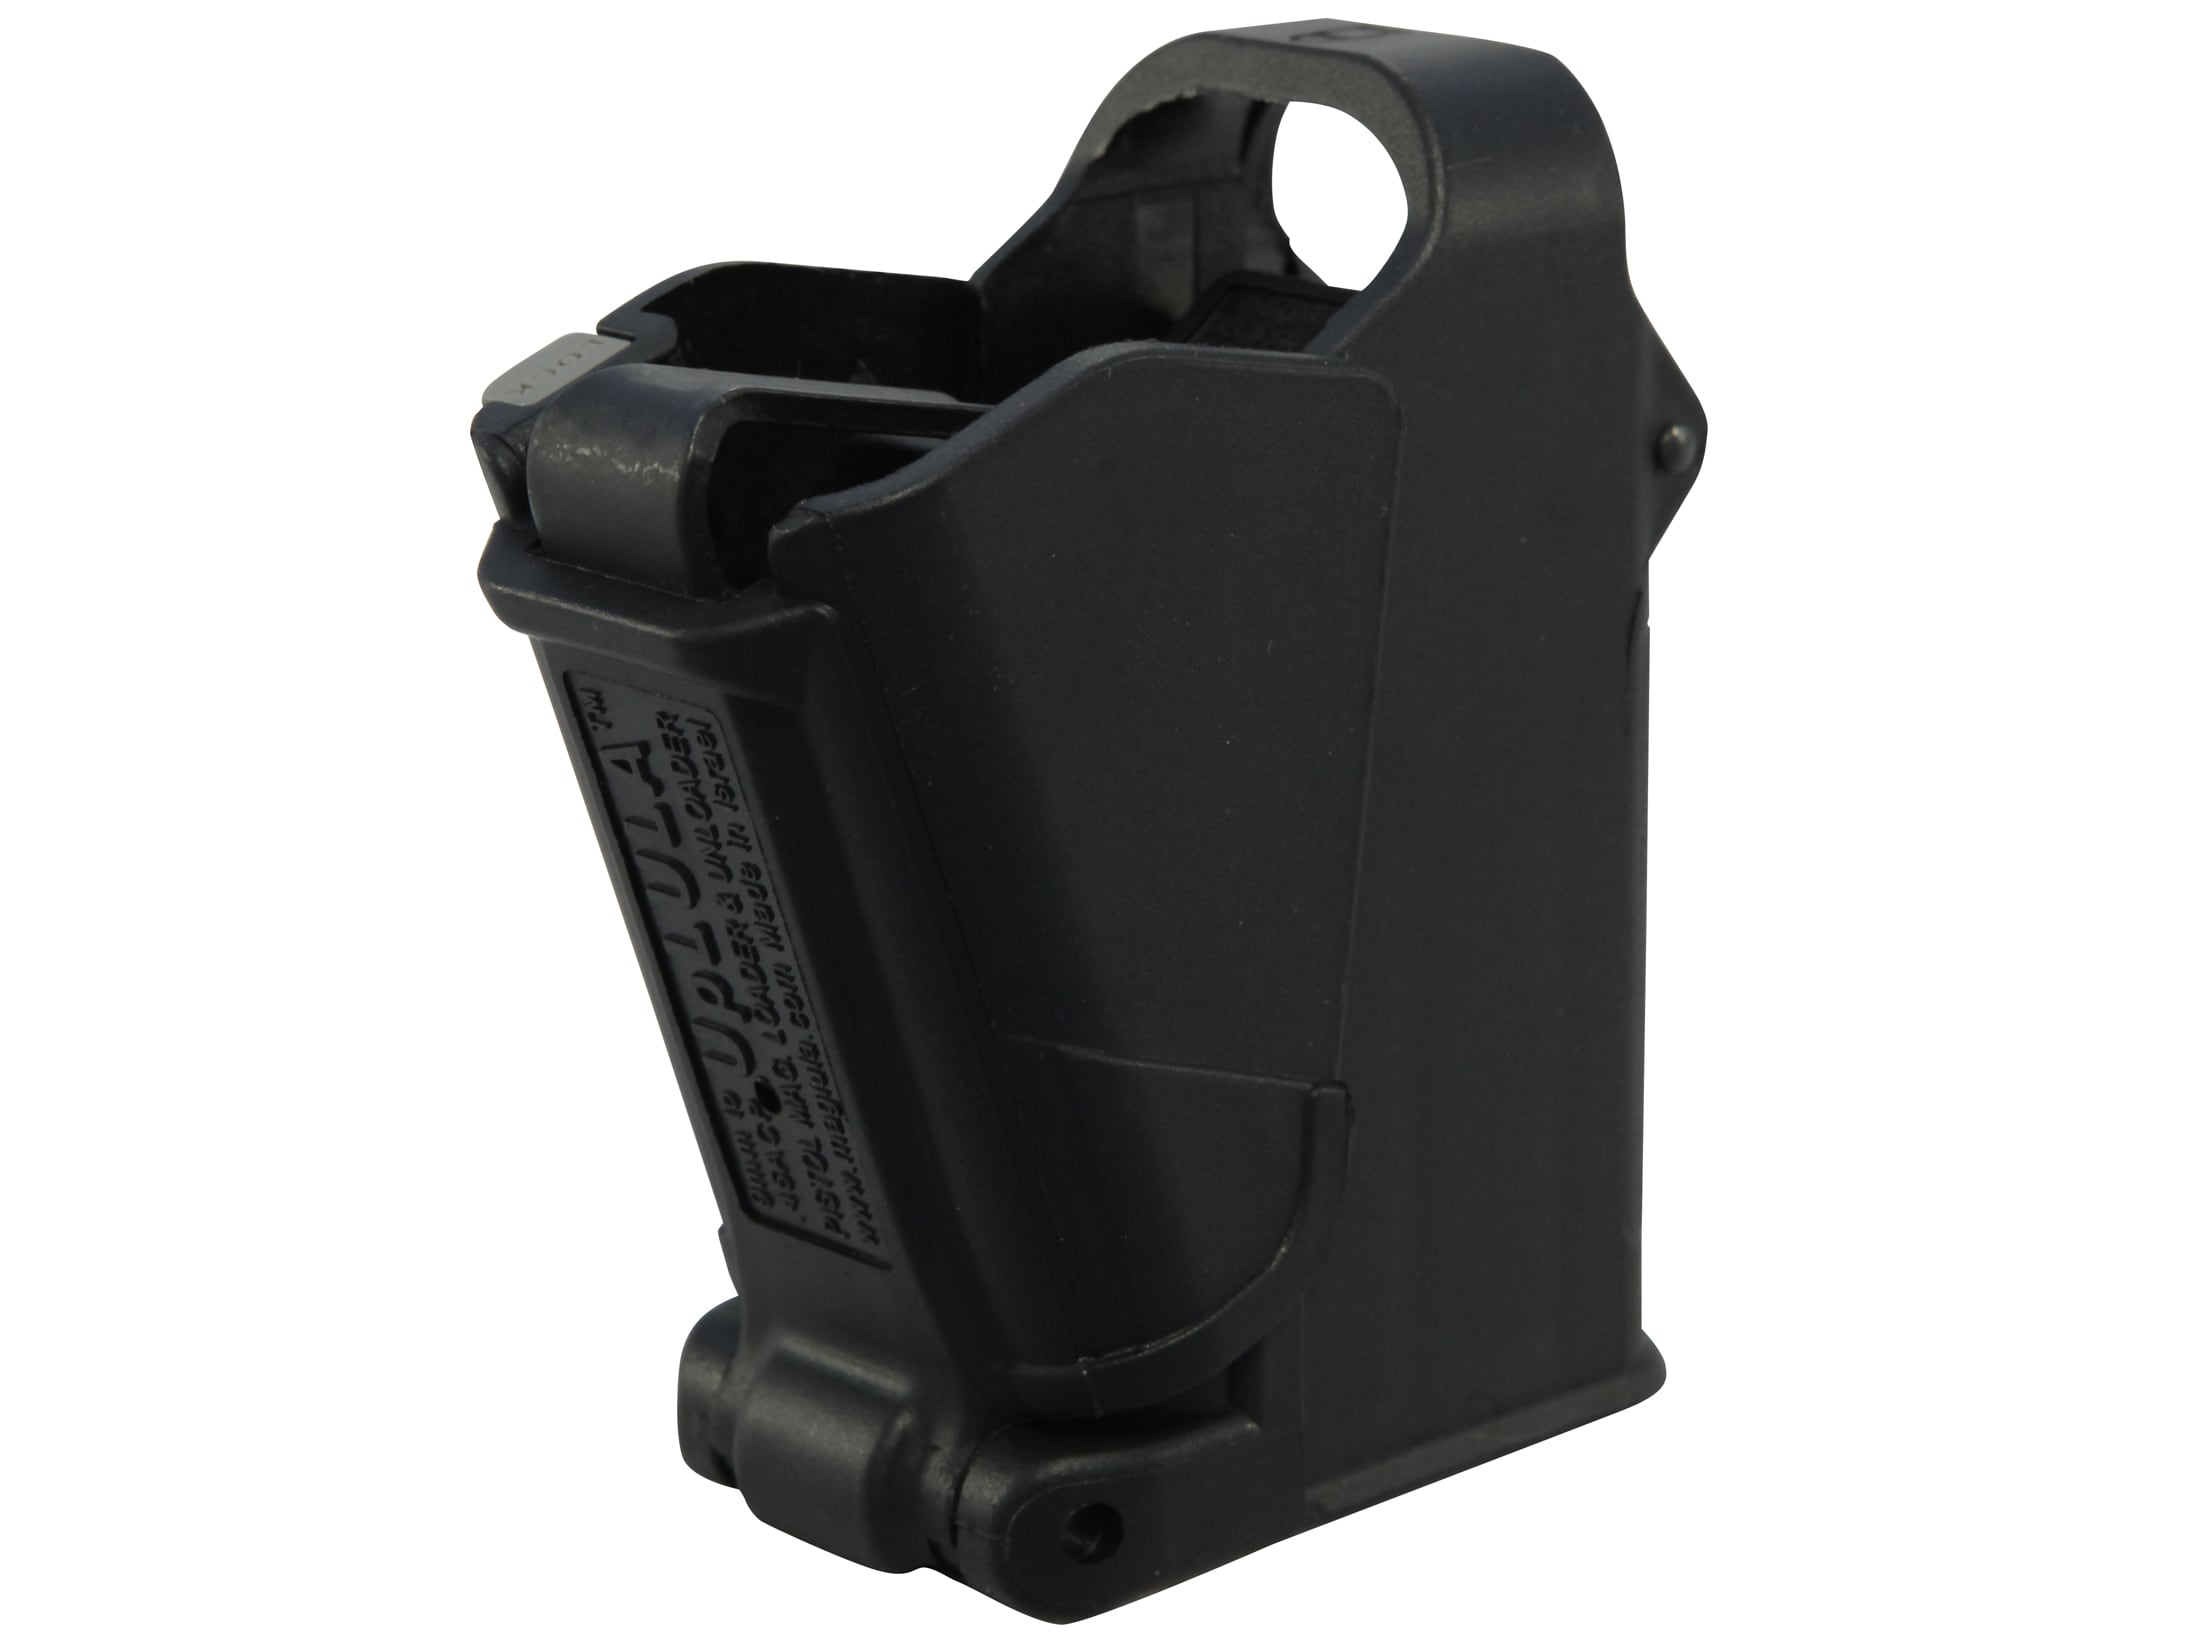 Pain free magazine loader for 40 S&W Caliber Green 3 pack 